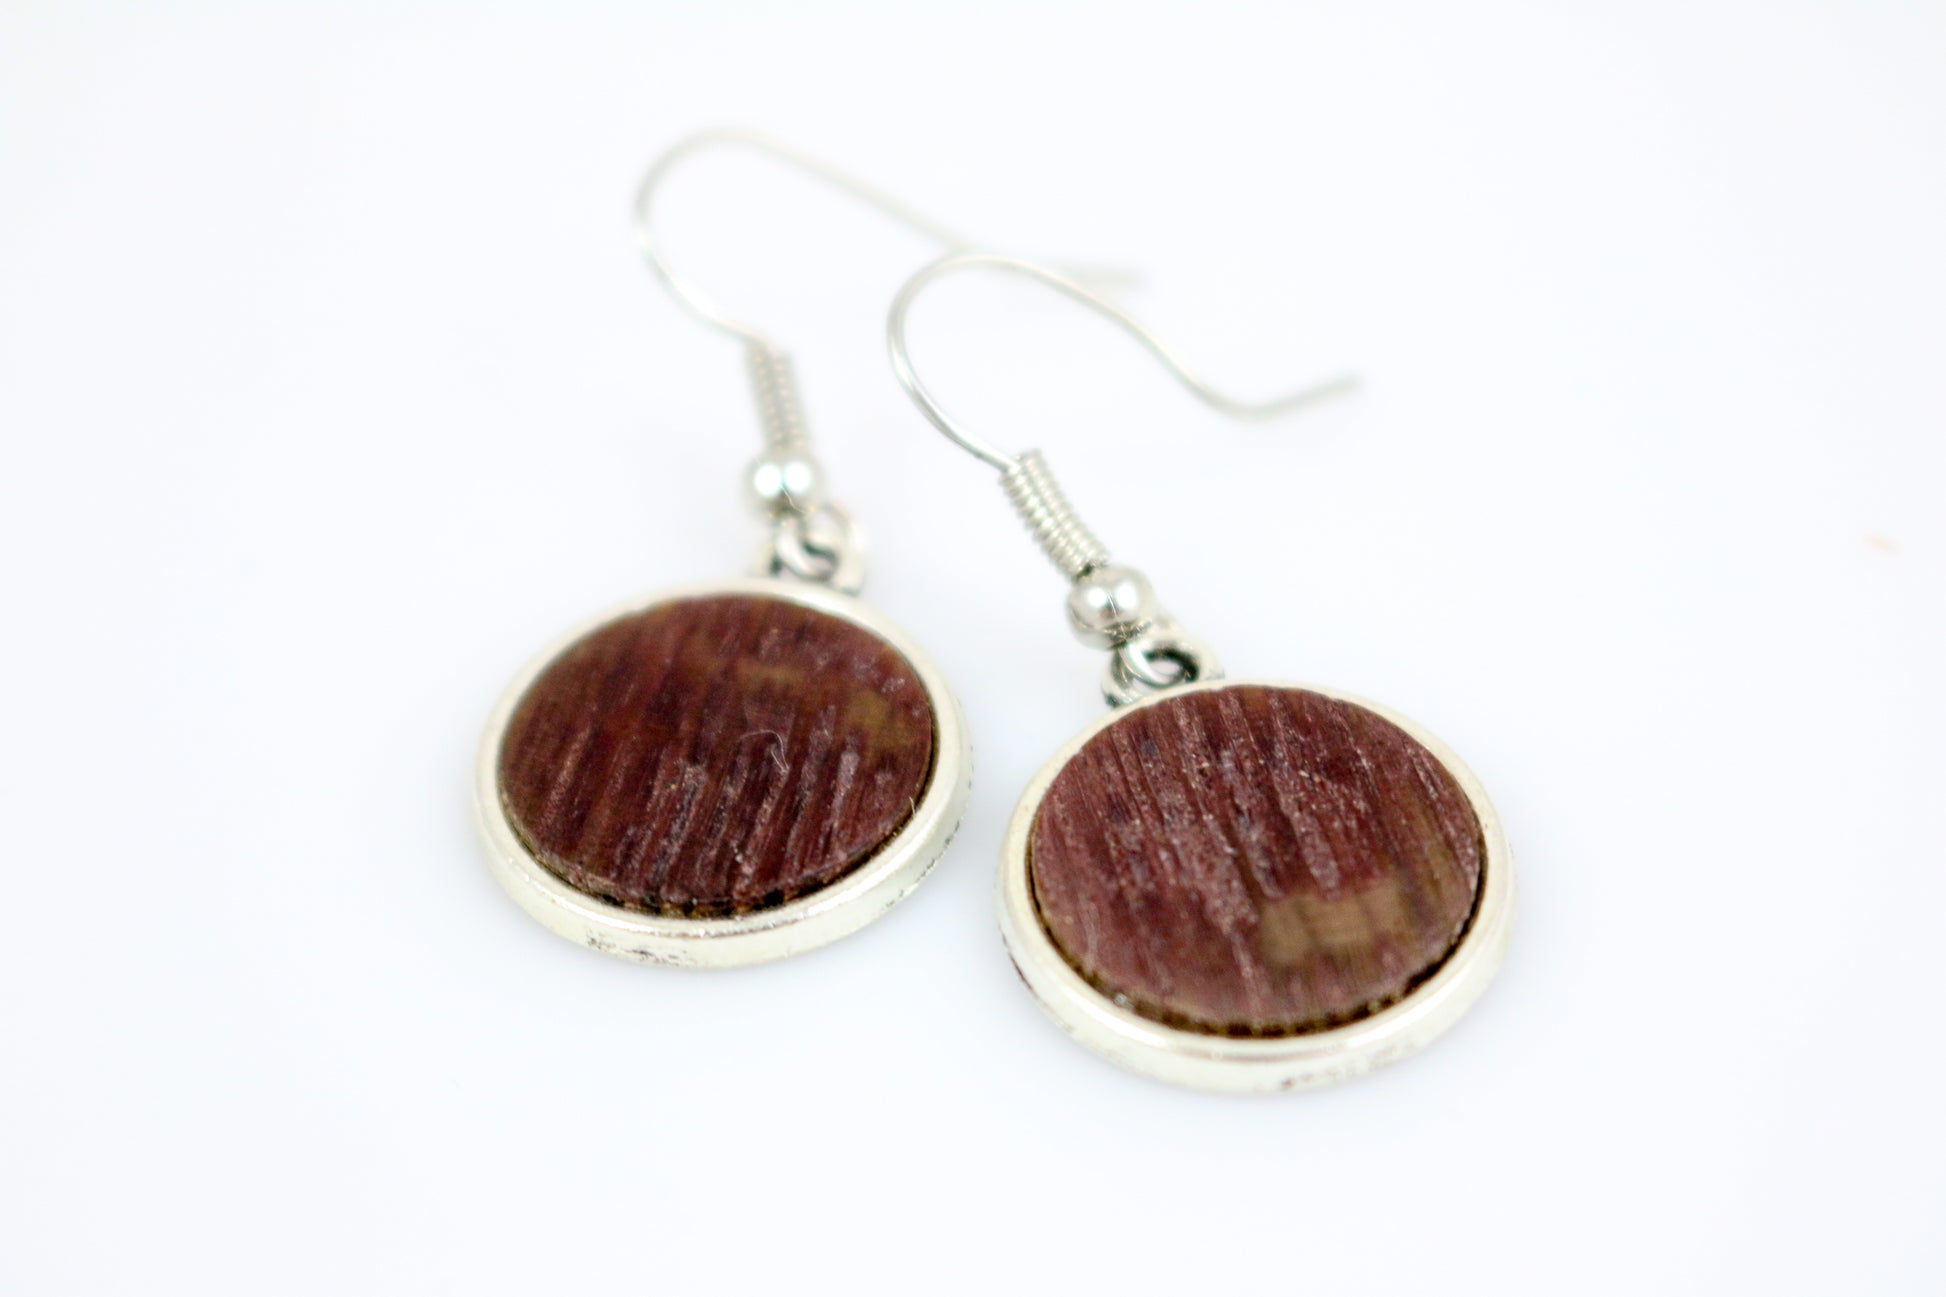 These beautiful silver plated earrings are crafted from reclaimed barrels that were making wine for years in the heart of wine country. Years of producing wine and now reclaimed into these amazing pieces of jewelry. Each piece is hand cut and assembled into fabulous art. Modern and chic yet wonderfully rustic. Stylishly sexy, and completely made from recycled barrels. This is functional art at its best and a delight to have.